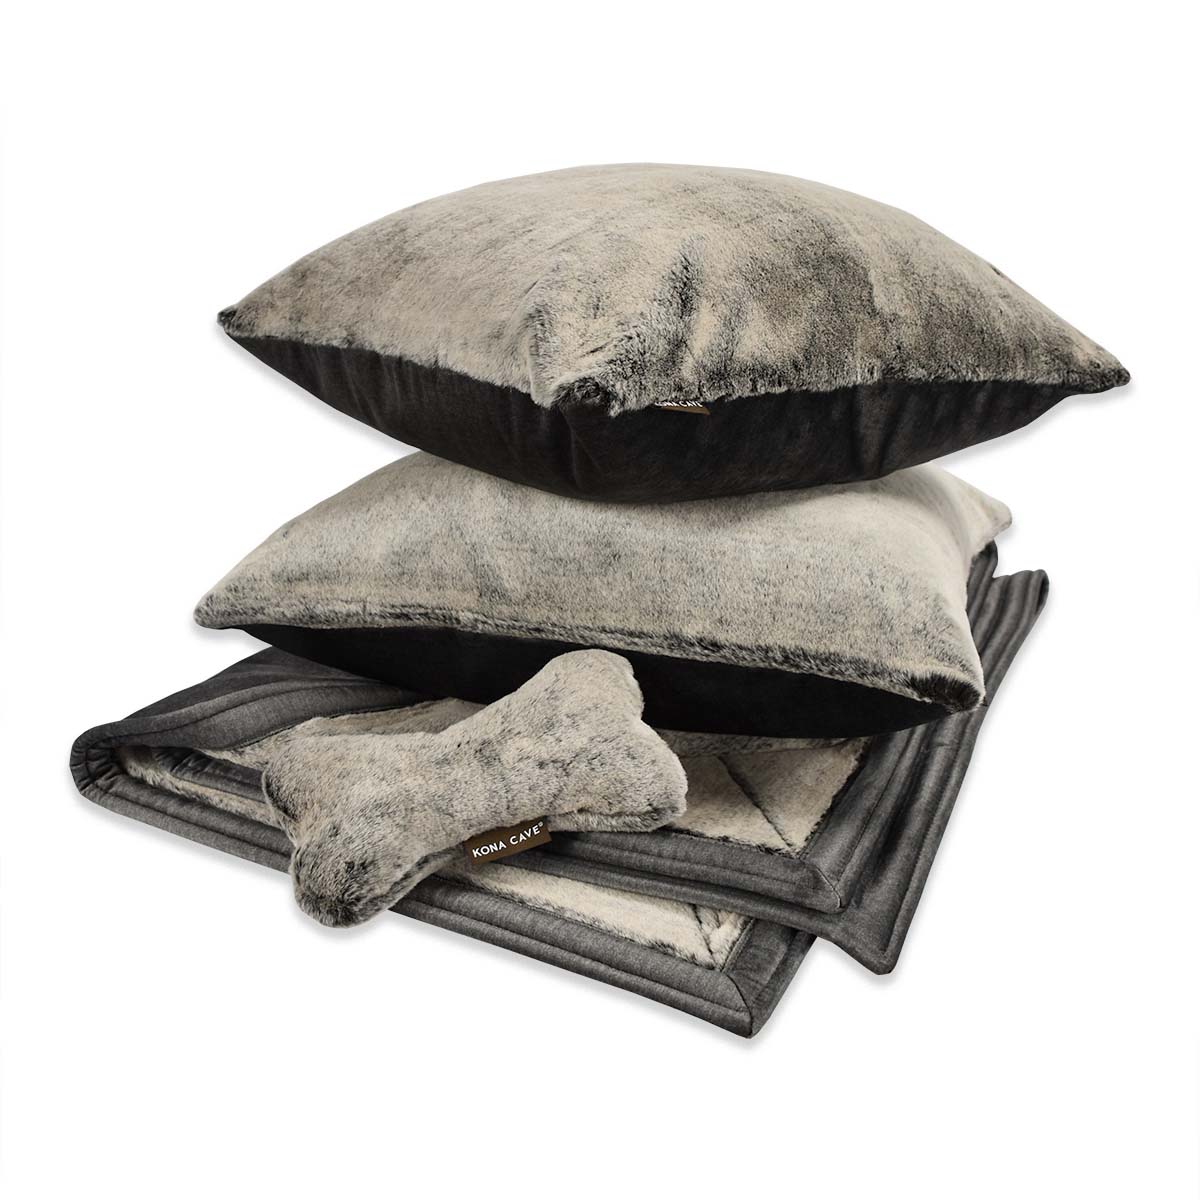 KONA CAVE® luxury vegan faux fur home and pet accessories. Great gift idea. Blanket, pillows and today dog bone.